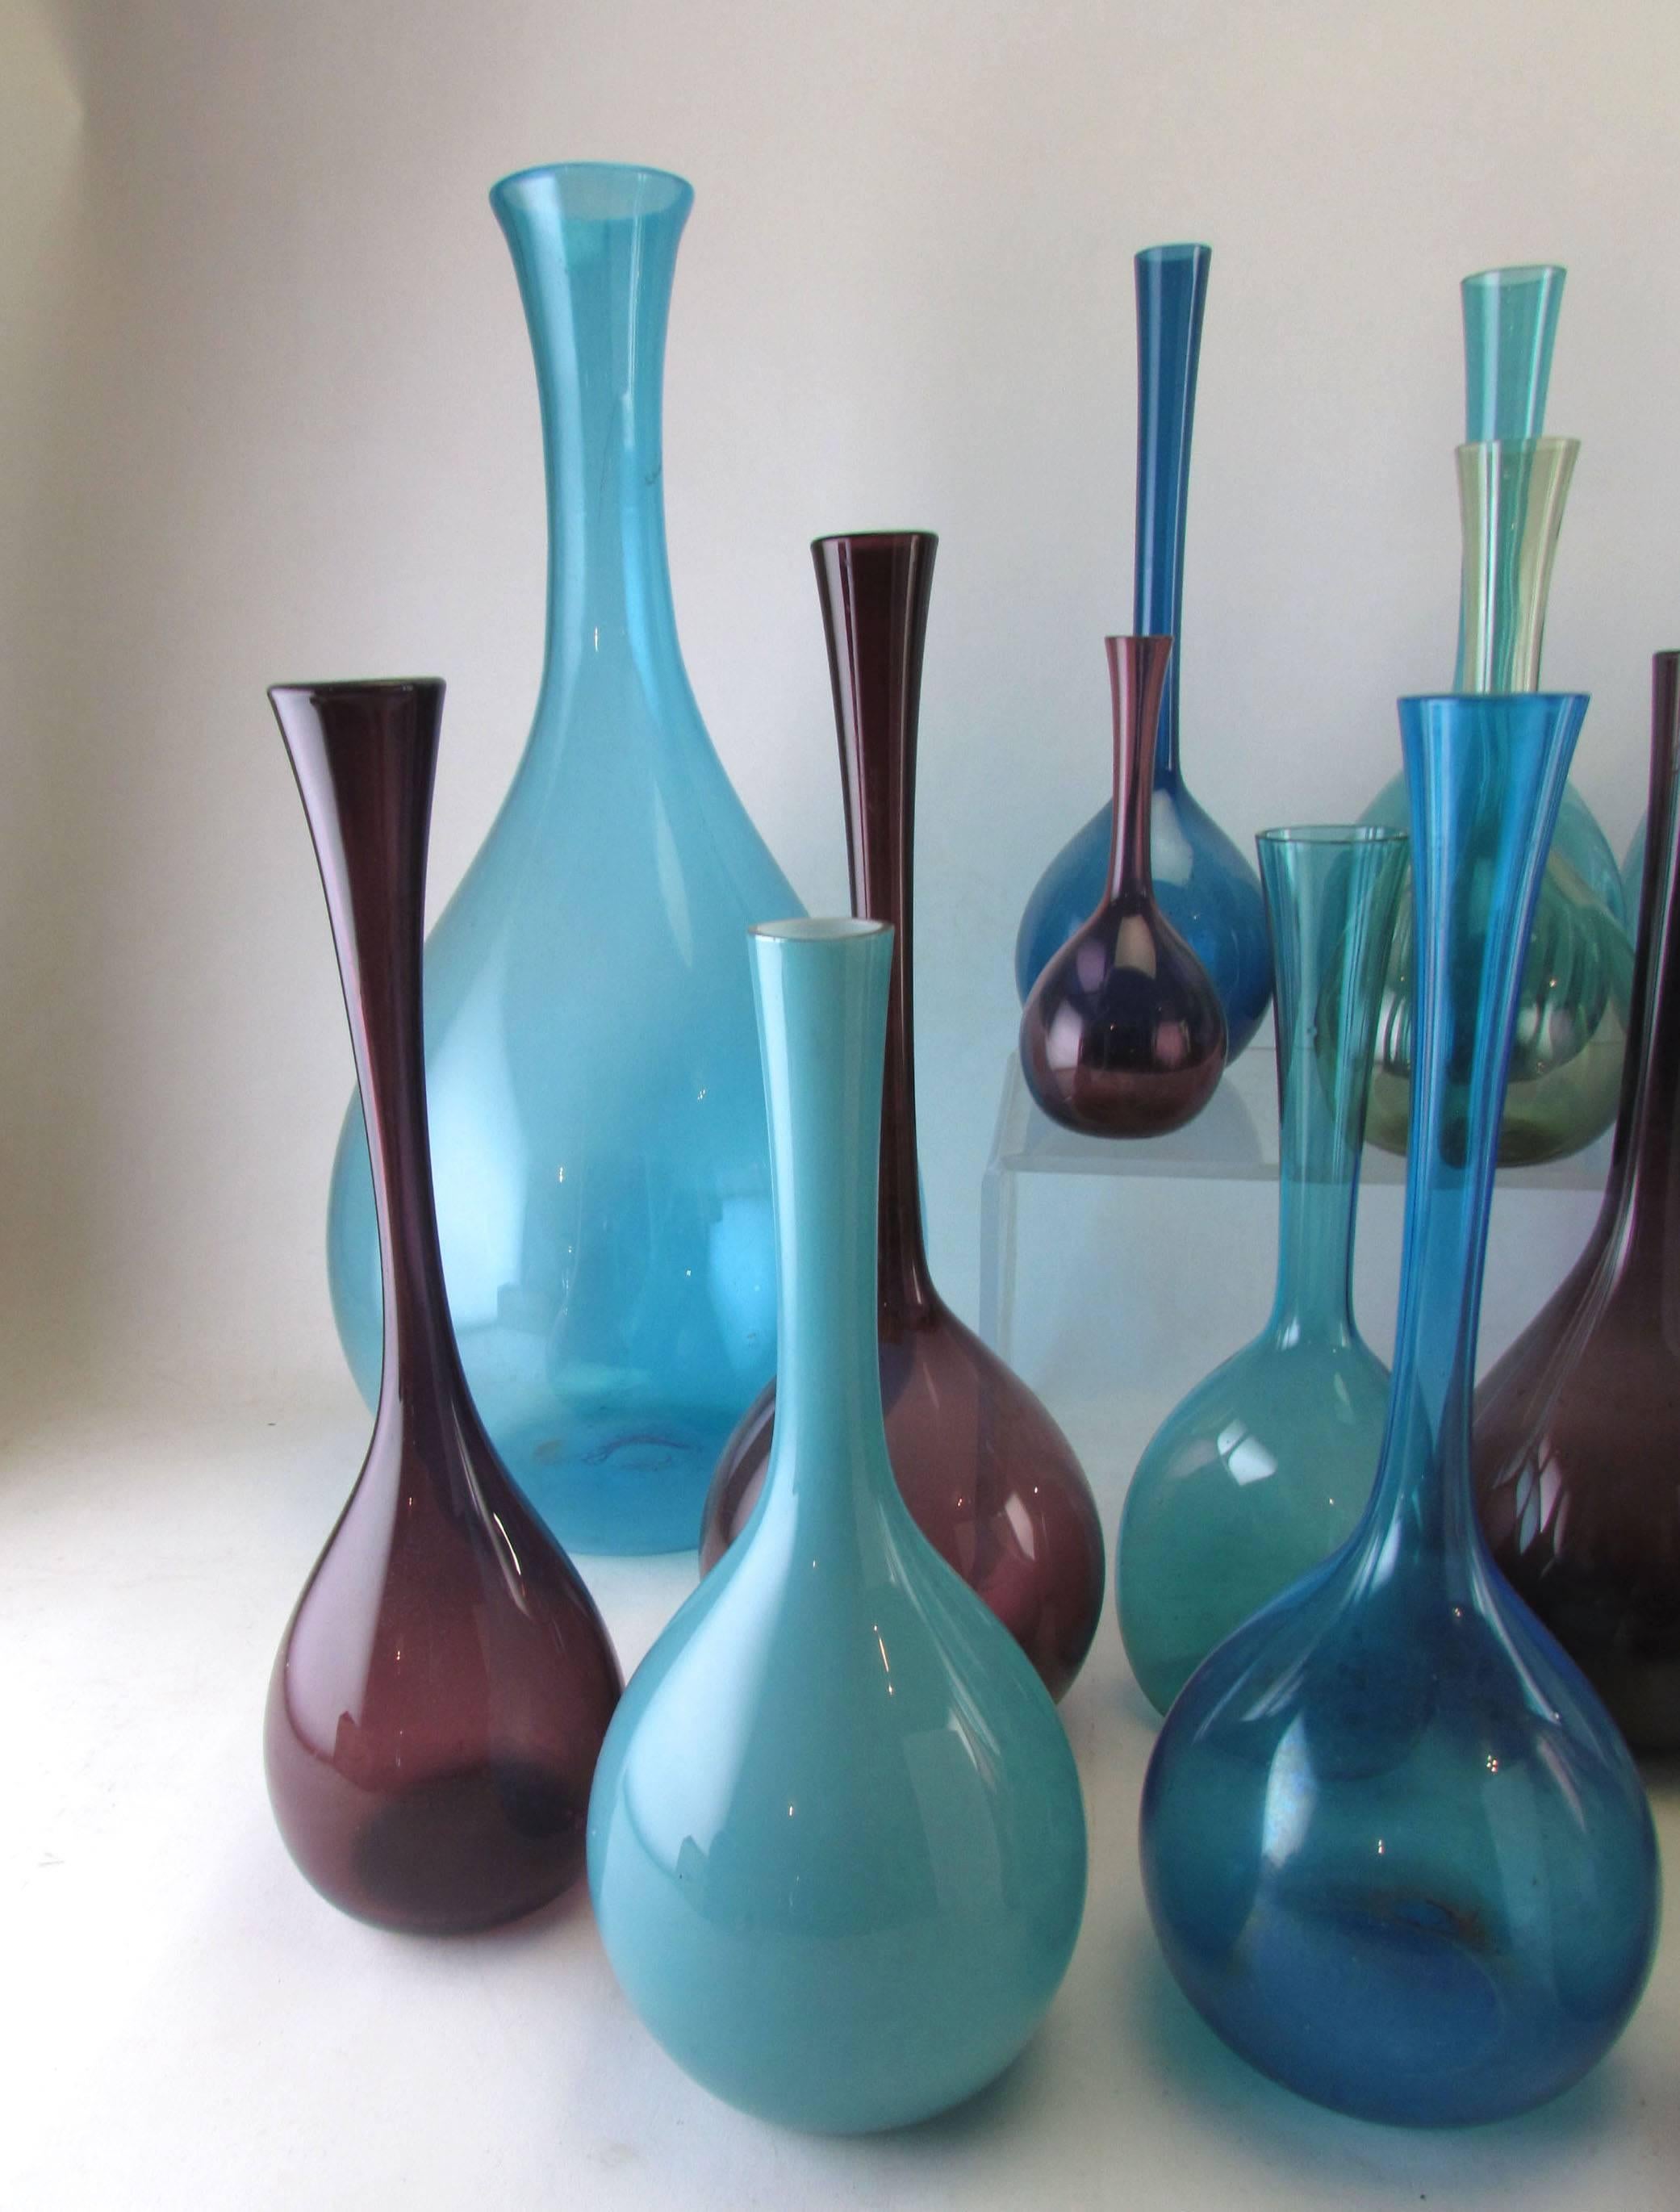 Collection of 19 midcentury Swedish blown glass vases in various sizes and colors. By various makers, some by Arthur Percy for Gullaskruf, Aseda, etc.

Tallest vase (deep blue cobalt) measures 19.5